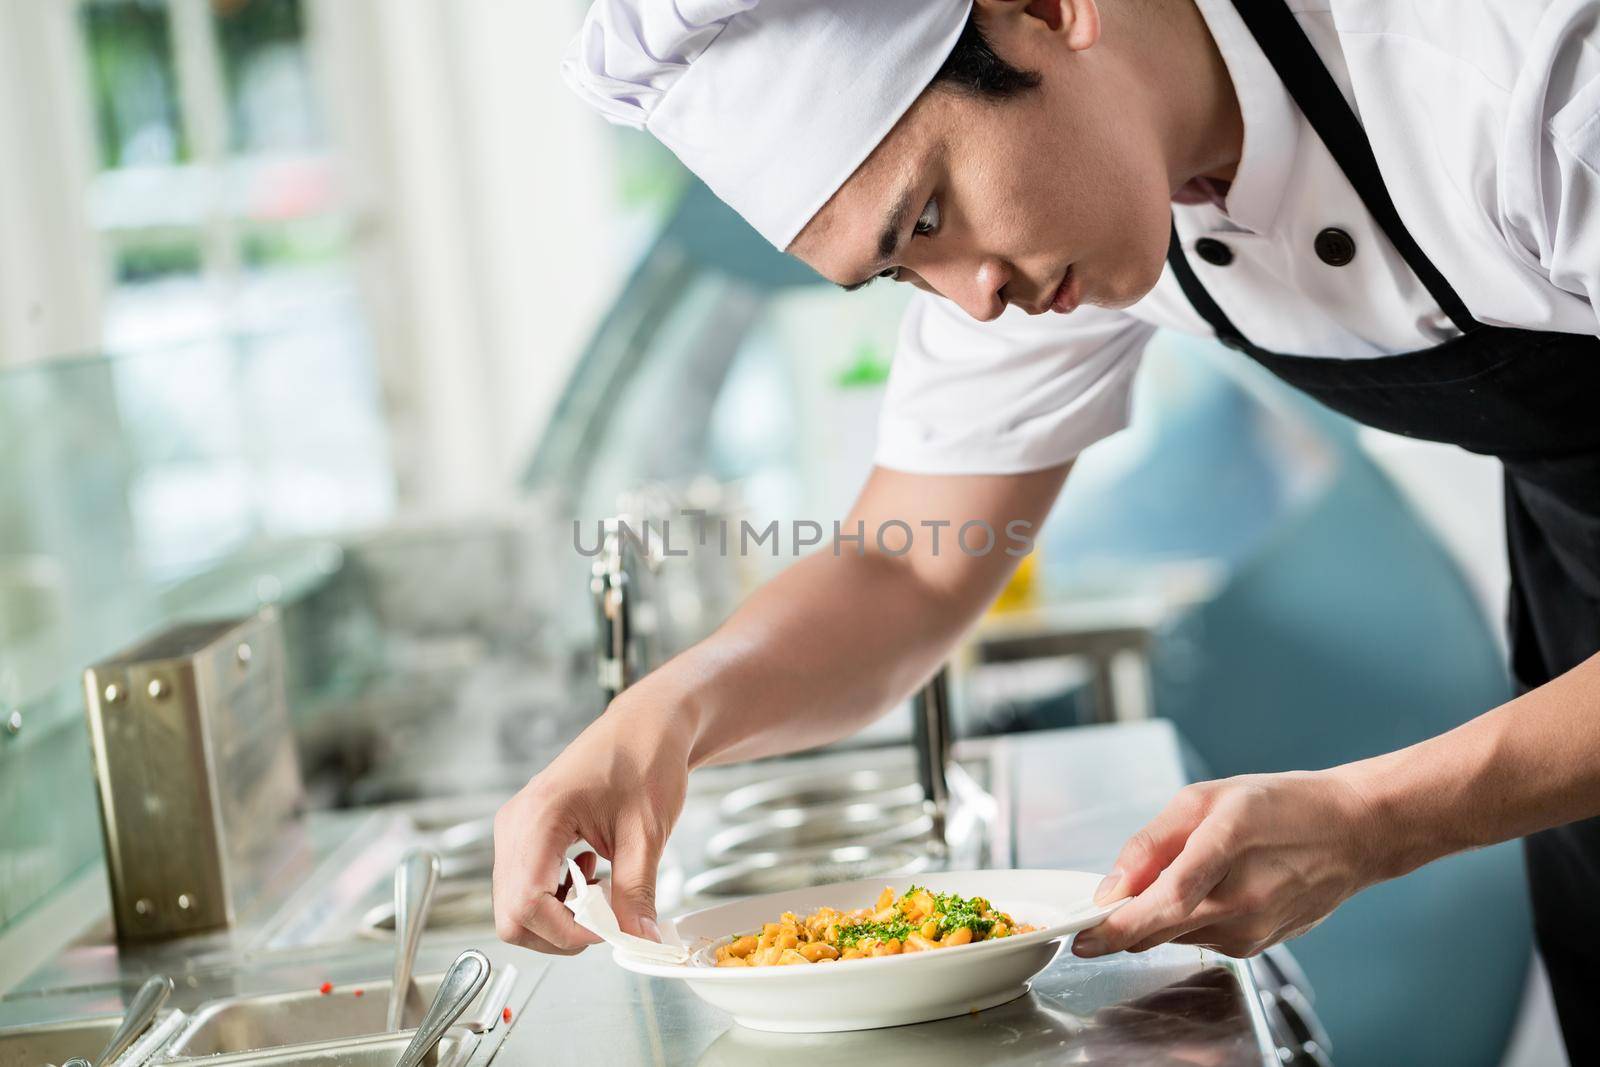 Gourmet chef plating up a dish of food by Kzenon